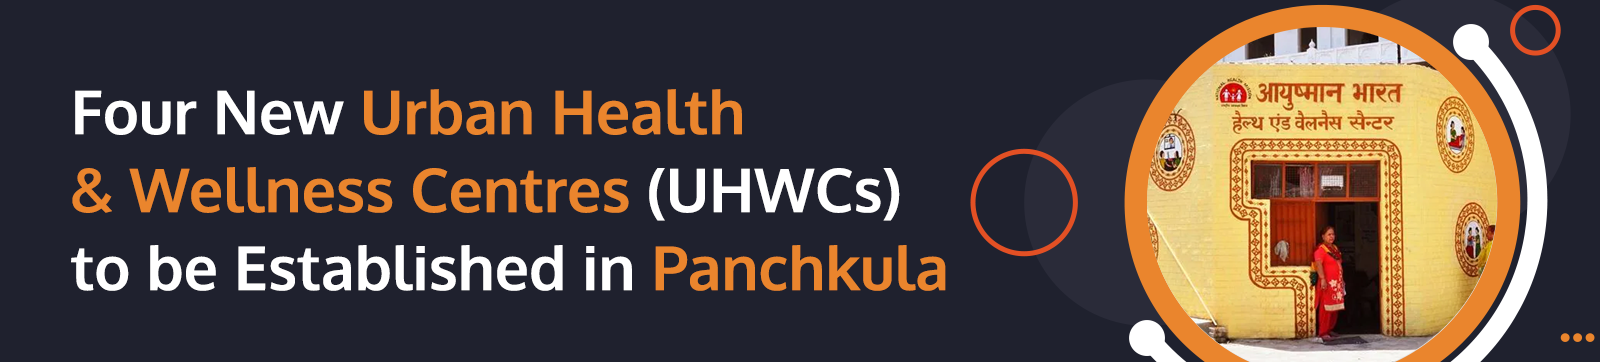 Panchkula to get Four new Urban Health and Wellness Centres (UHWCs)